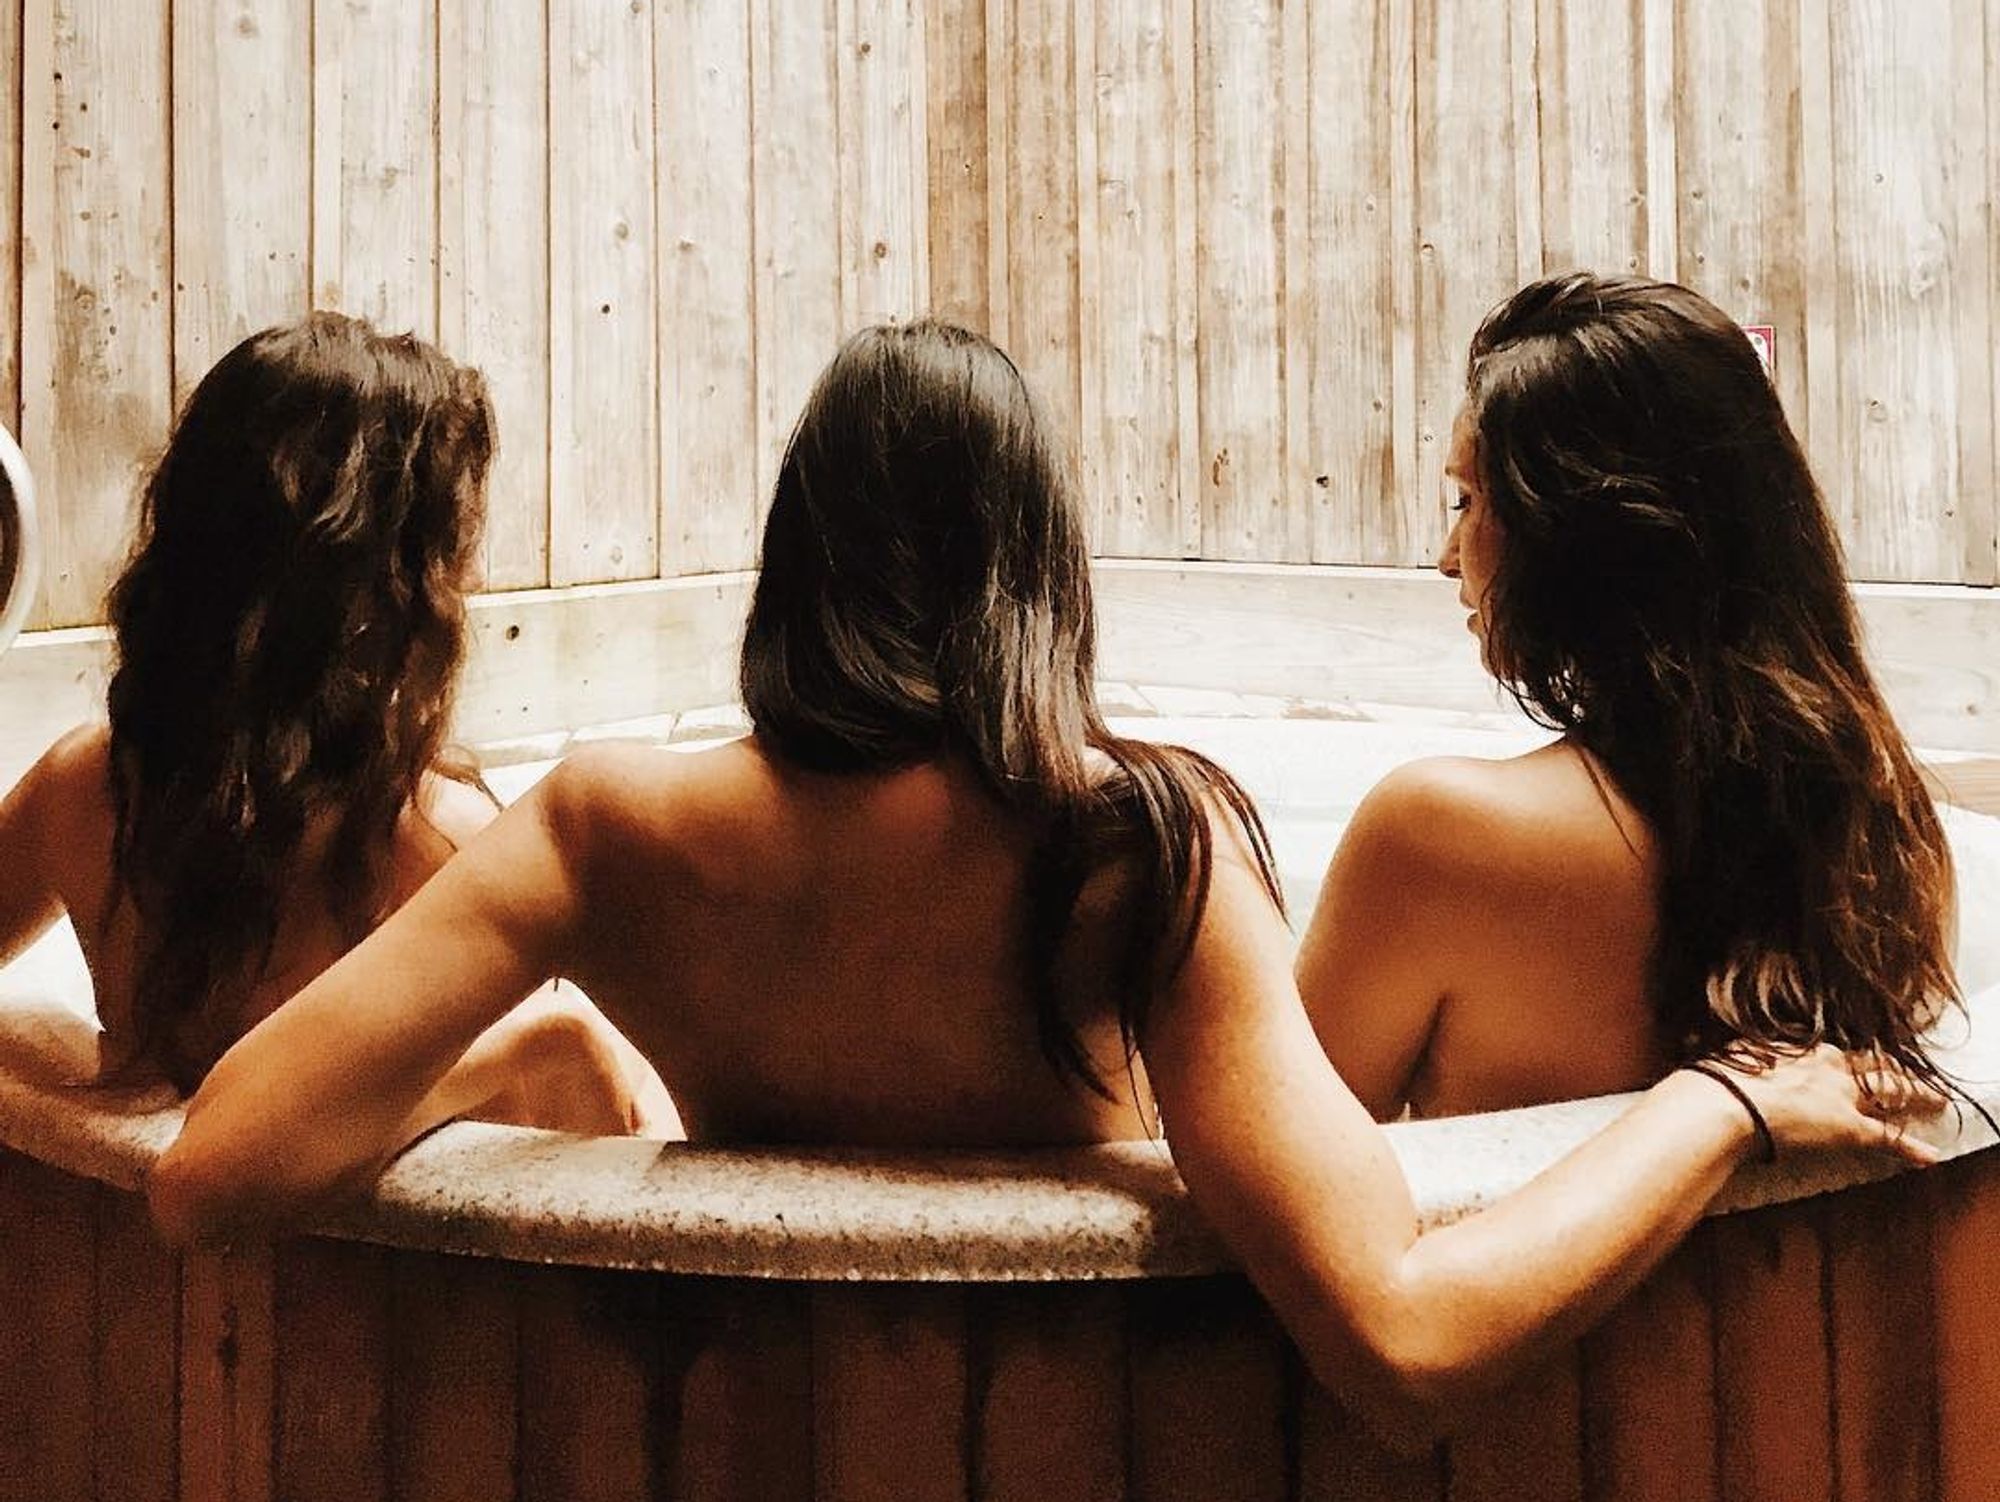 The 9 Best Spas for Friends and Groups in the Bay Area